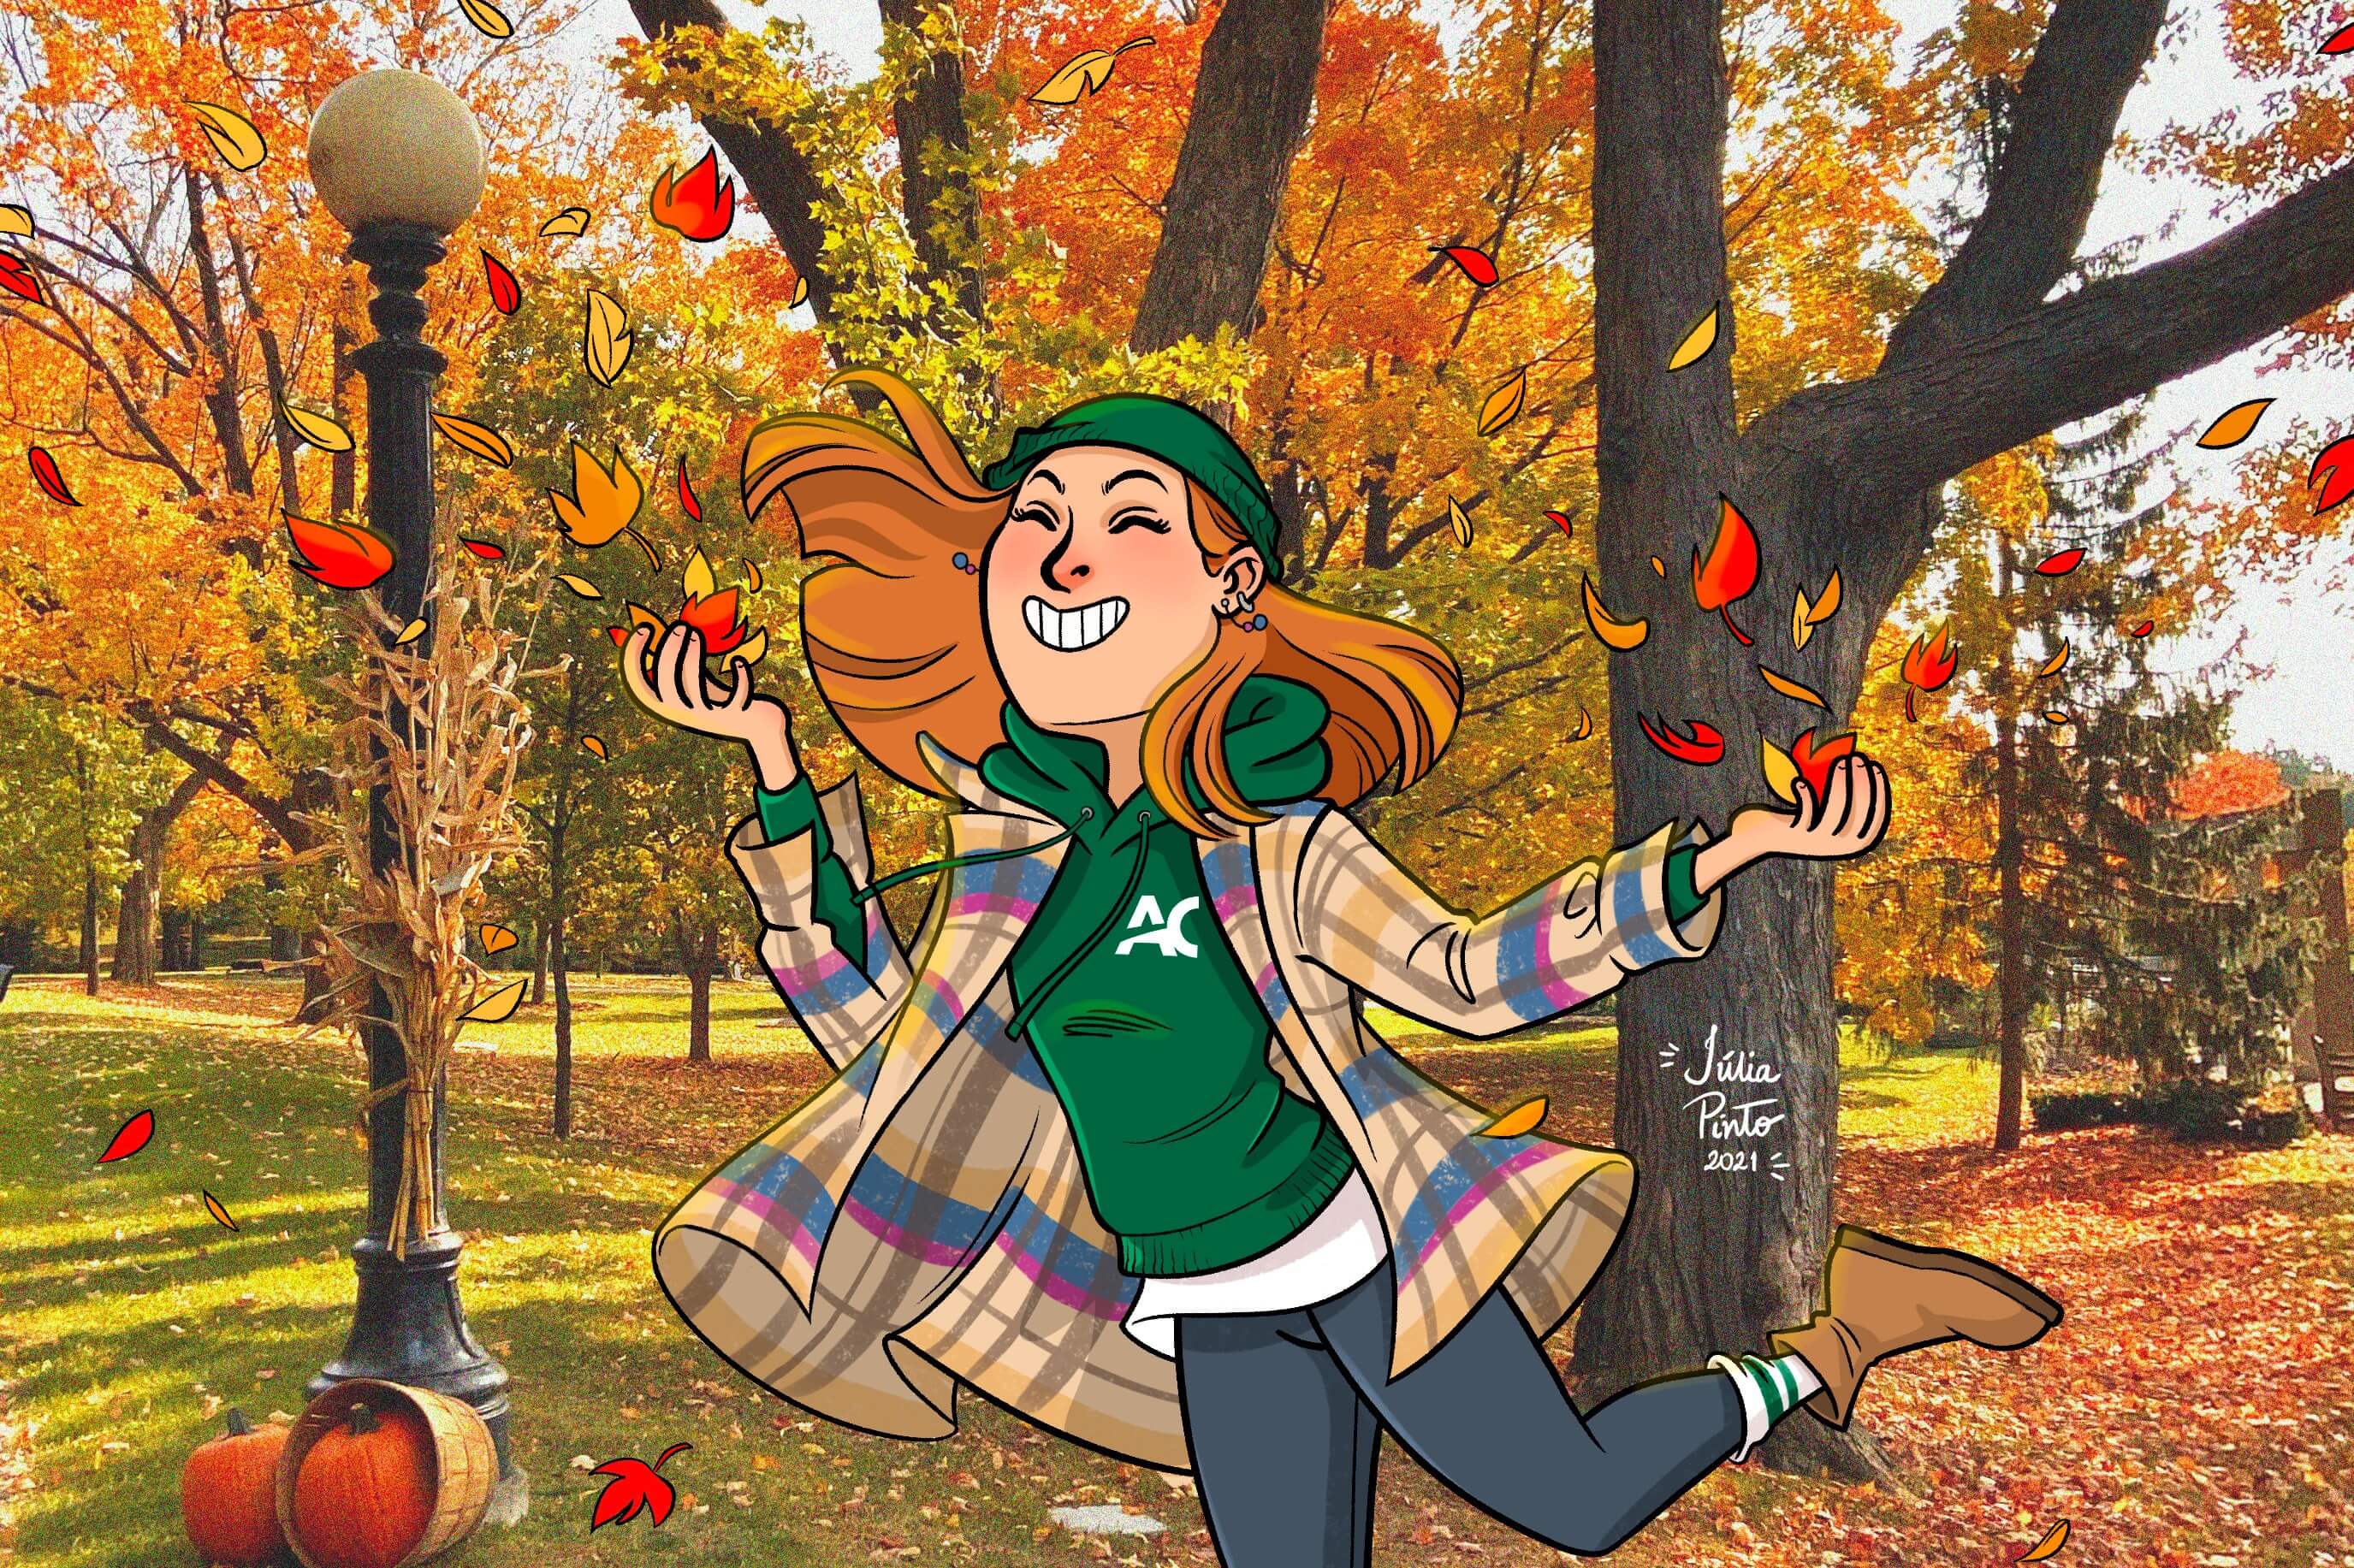 Illustration of an Algonquin College student enjoying fall weather - on a photographic background of a park during a bright fall day with colourfull leaves.